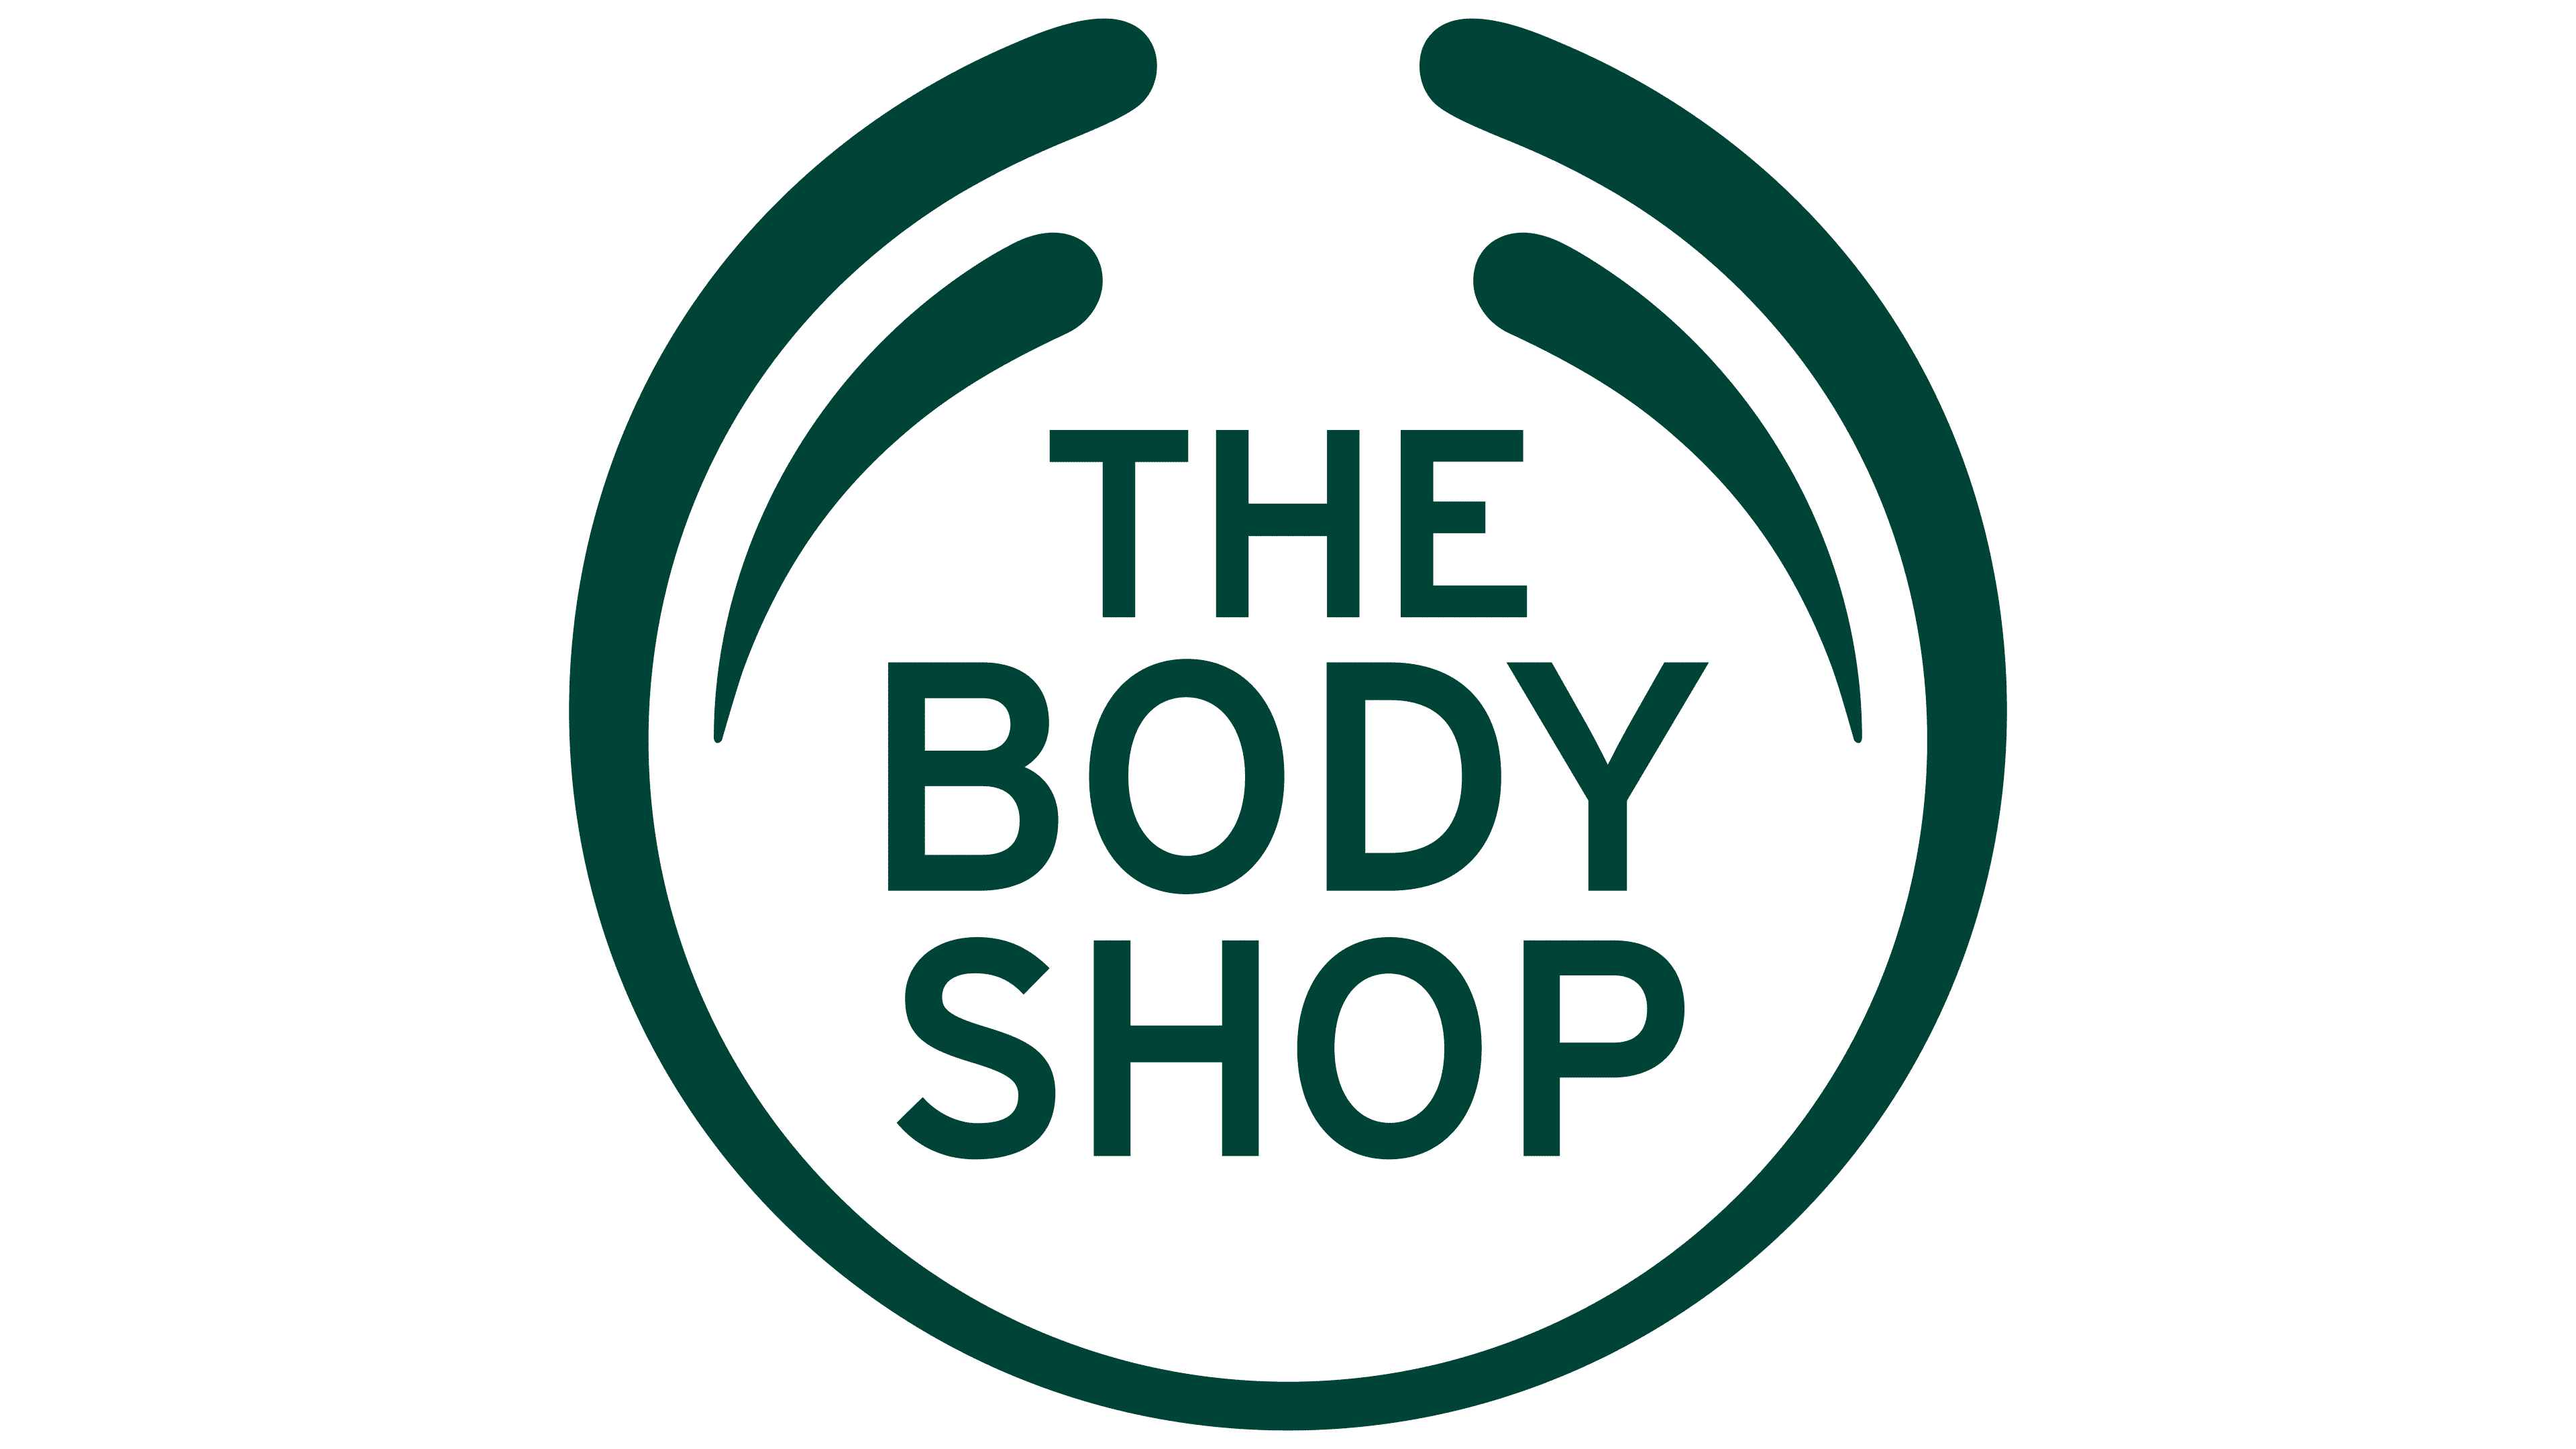 The Body Shop - Grab an Extra 20% off the Body Shop Goodies.